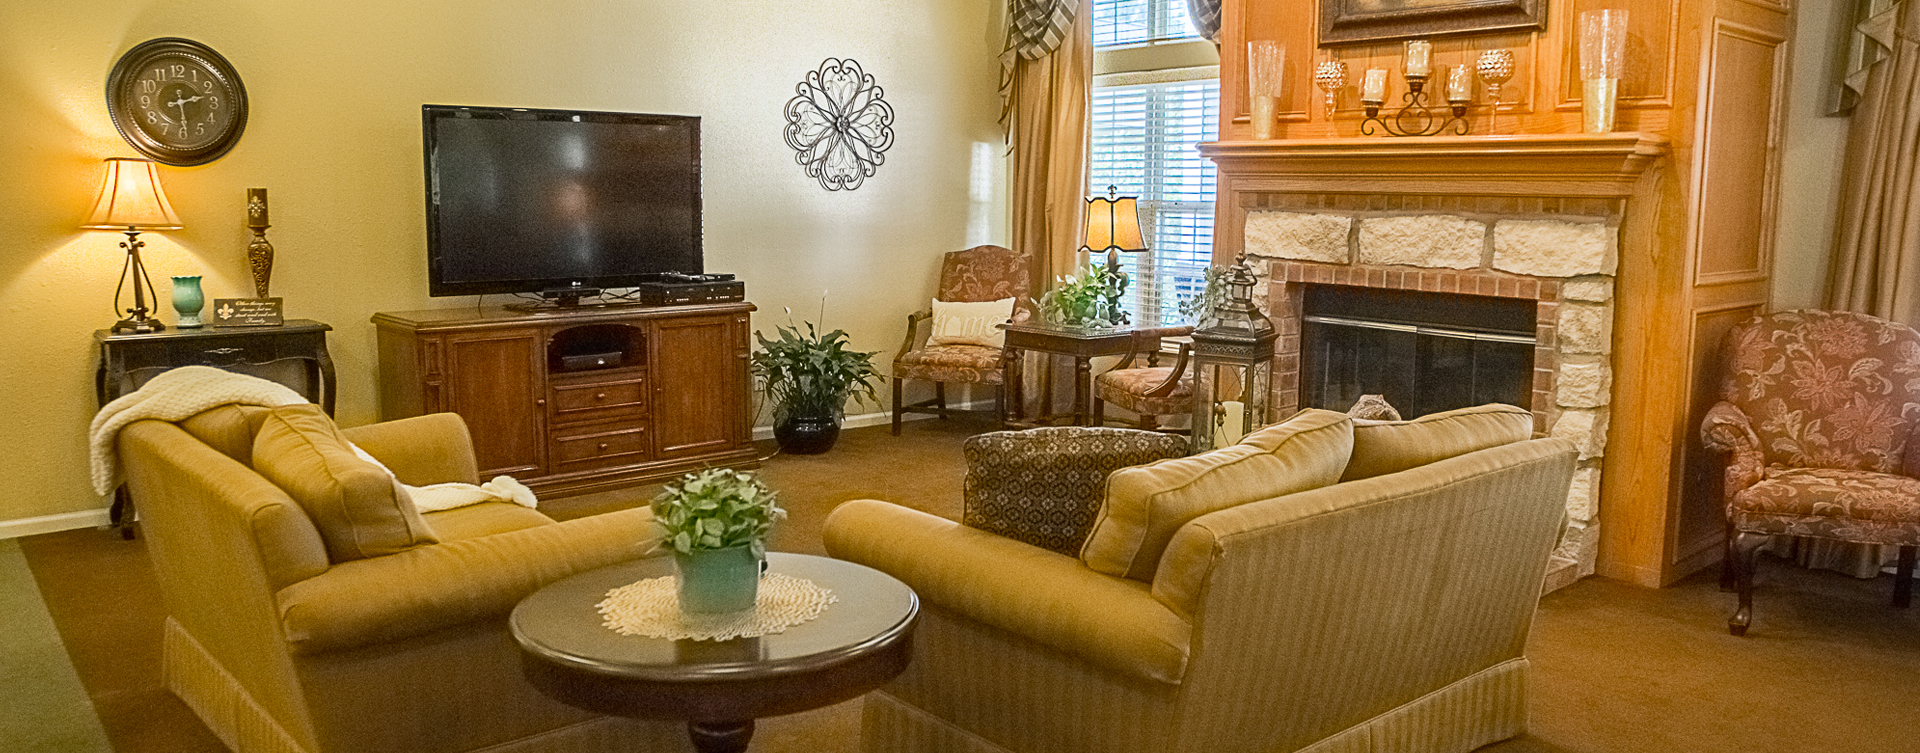 Socialize with friends in the living room at Bickford of Muscatine